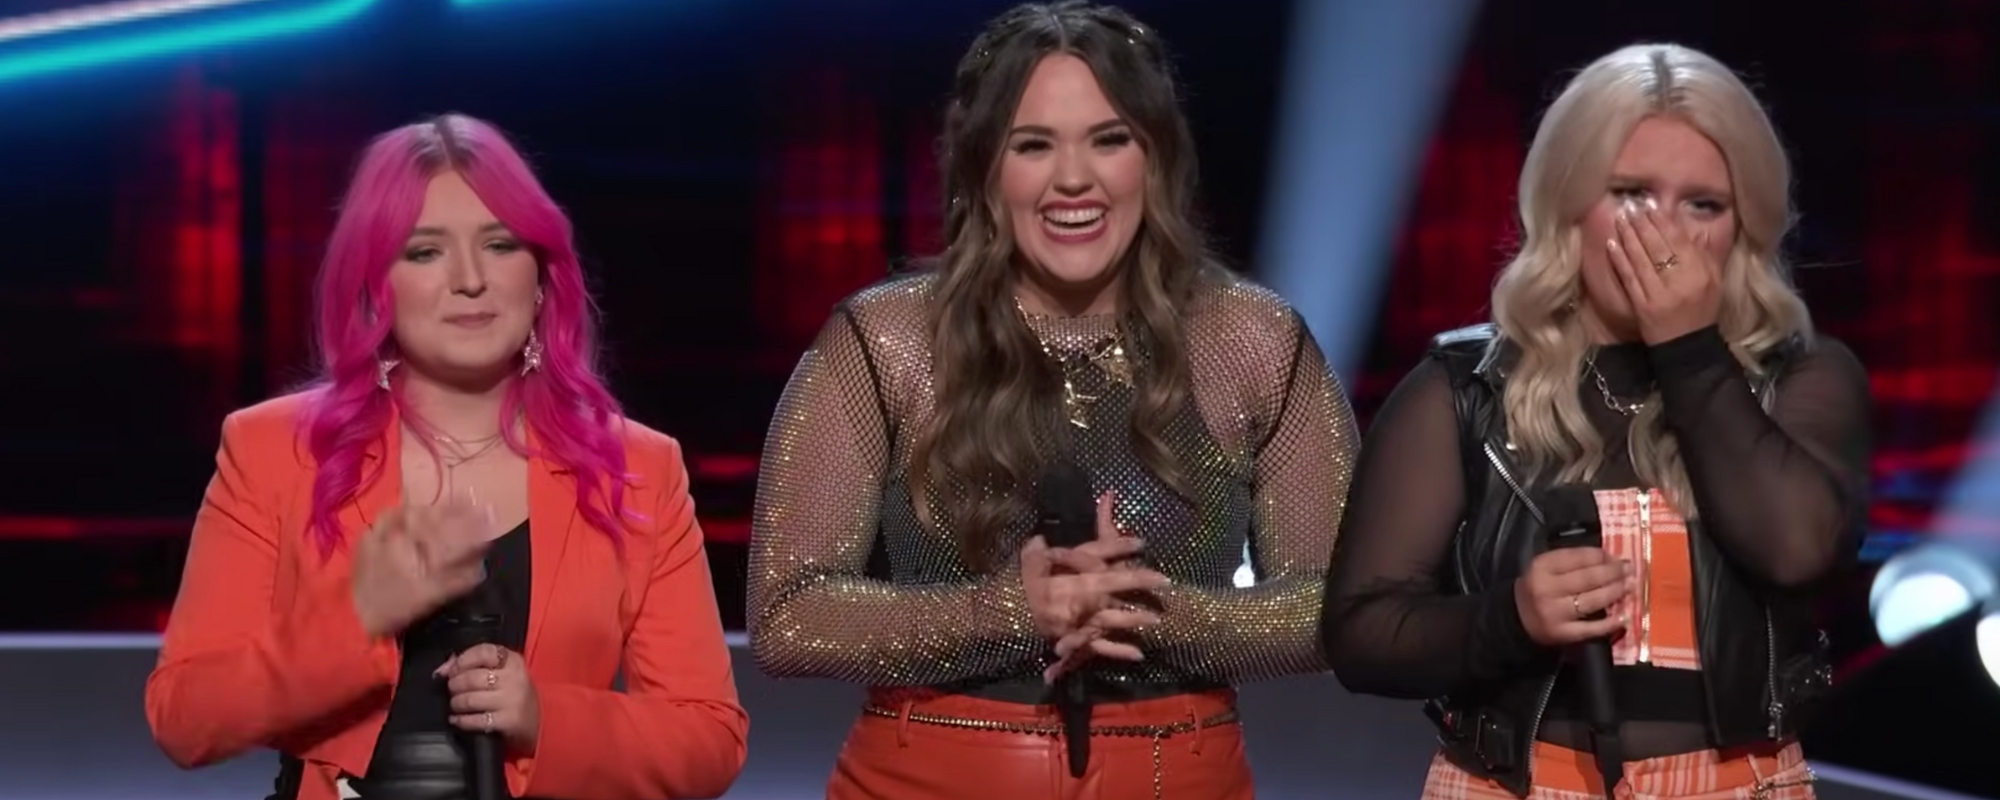 Oklahoma Trio OK3 Scores 4-Chair Turn with Sassy Meghan Trainor Cover in ‘The Voice’ Blind Audition